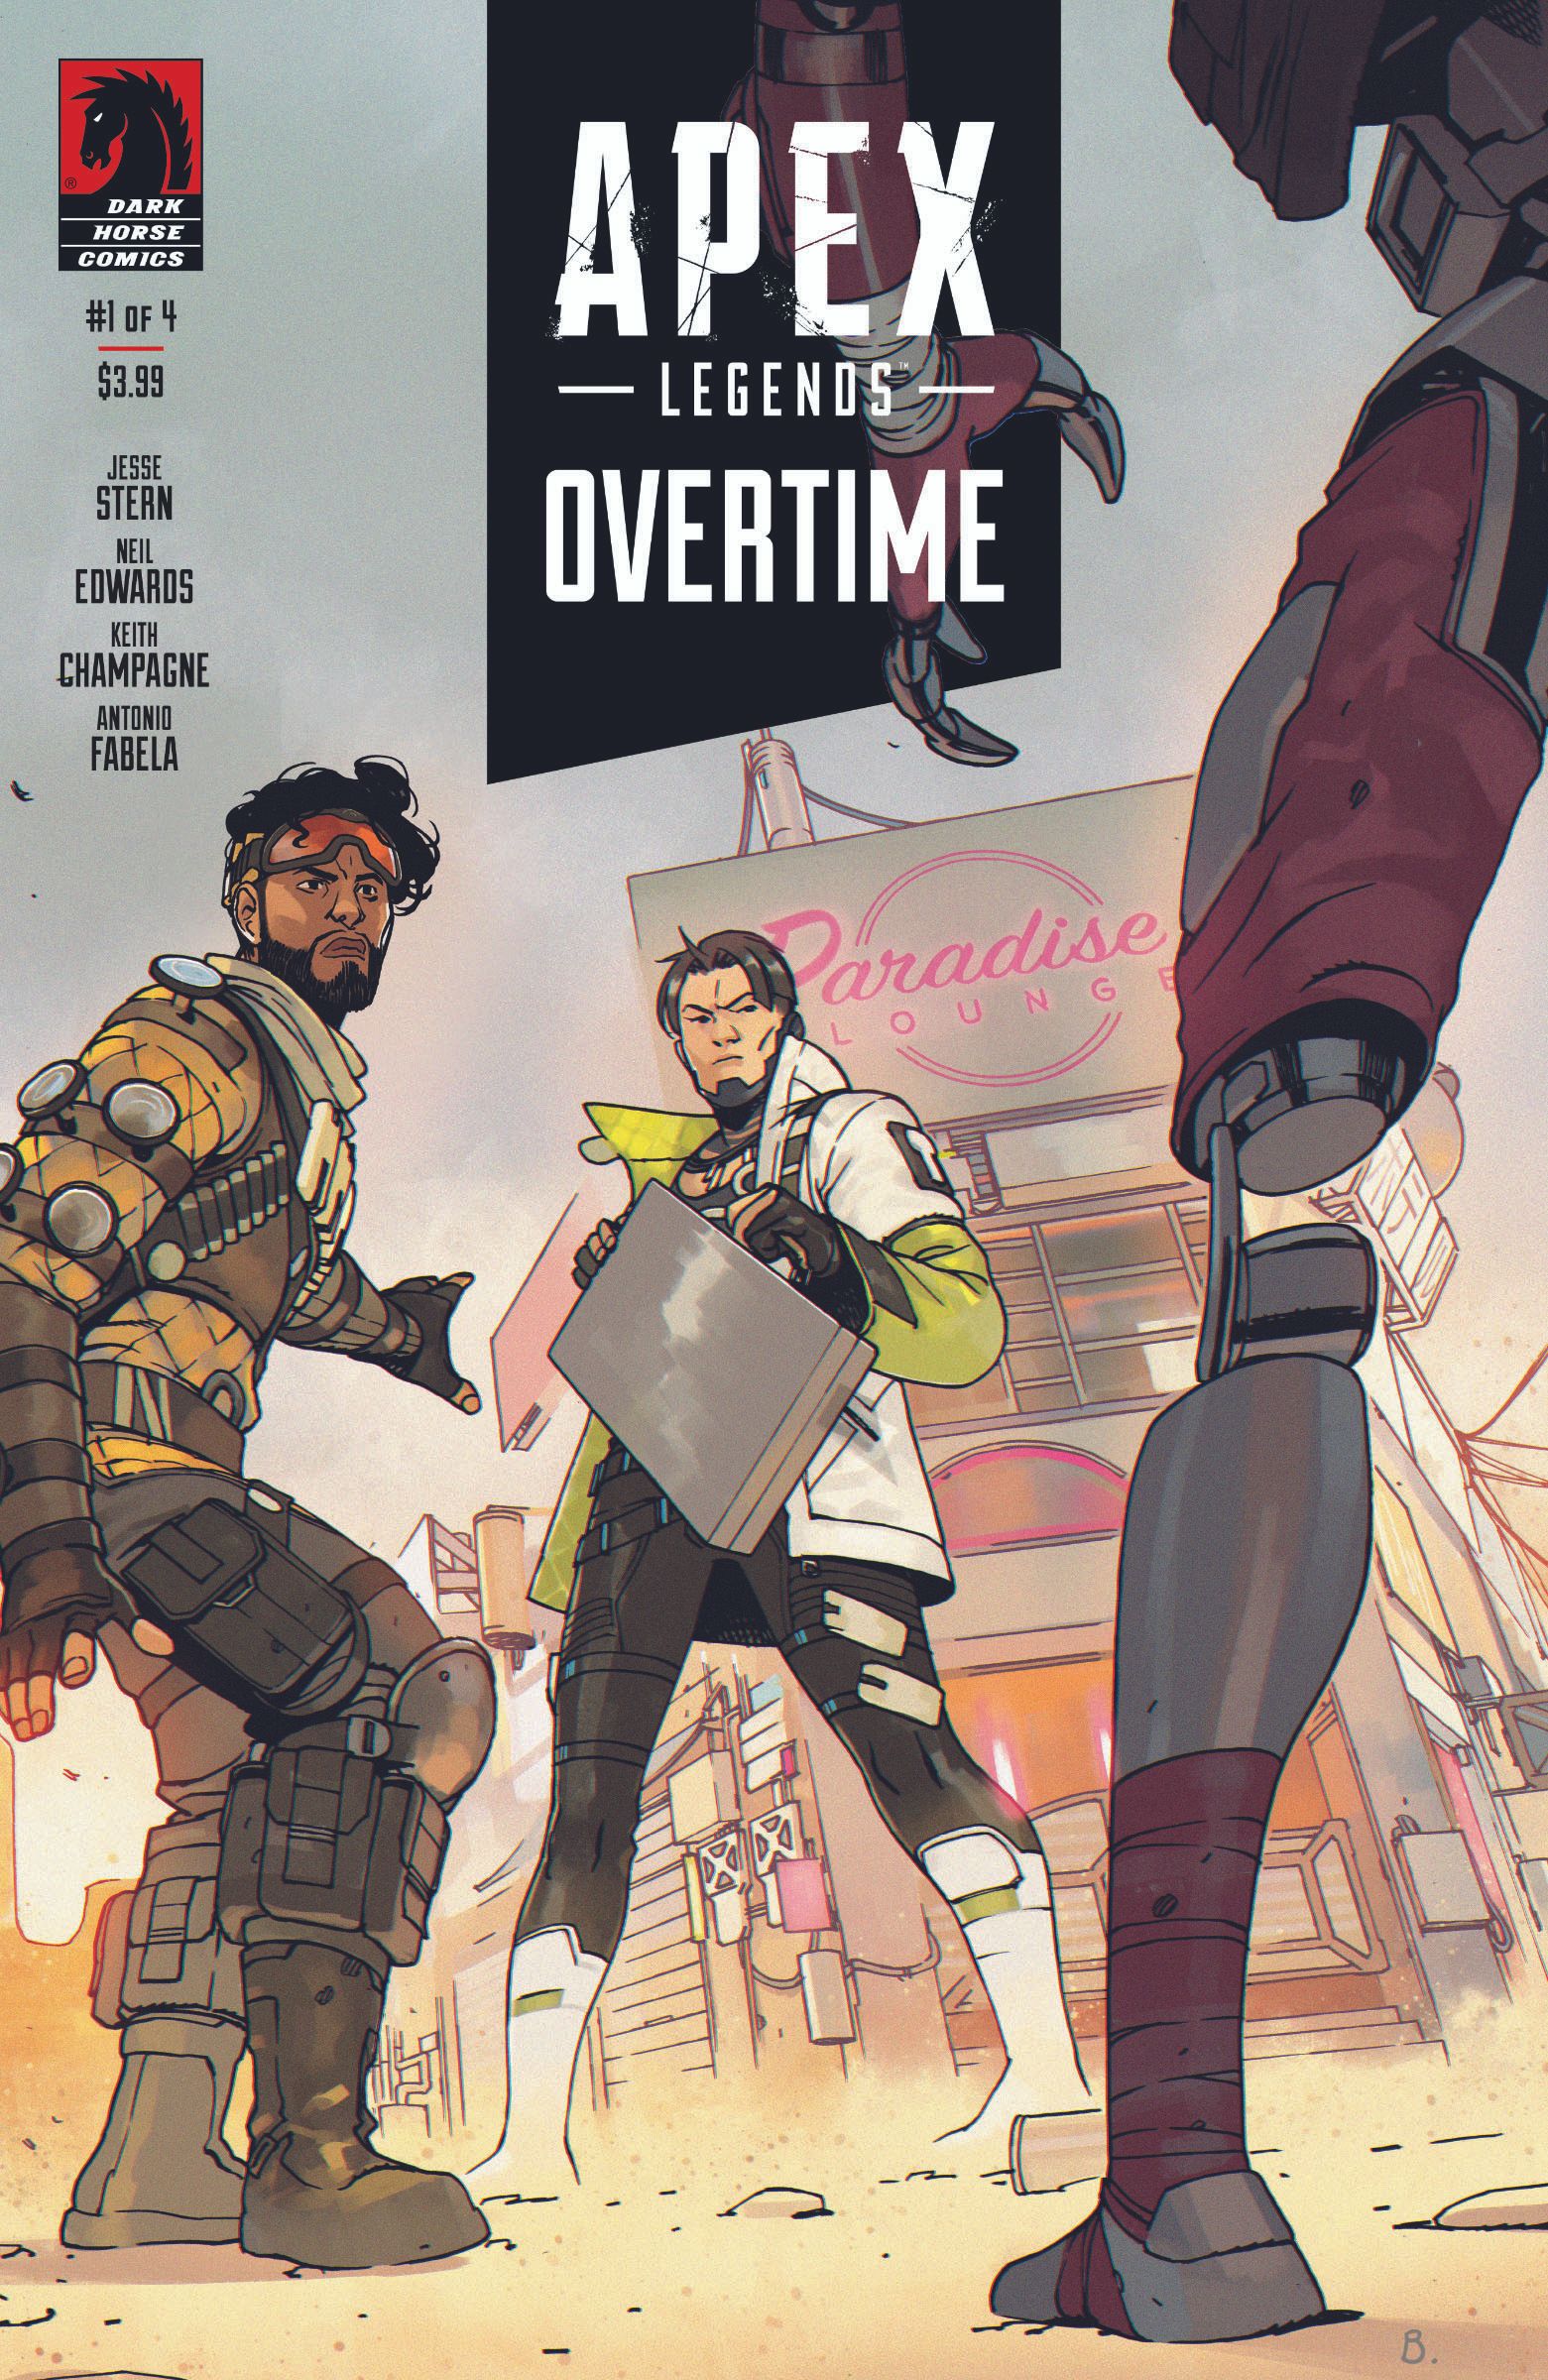 Apex Legends Overtime #1 Cover